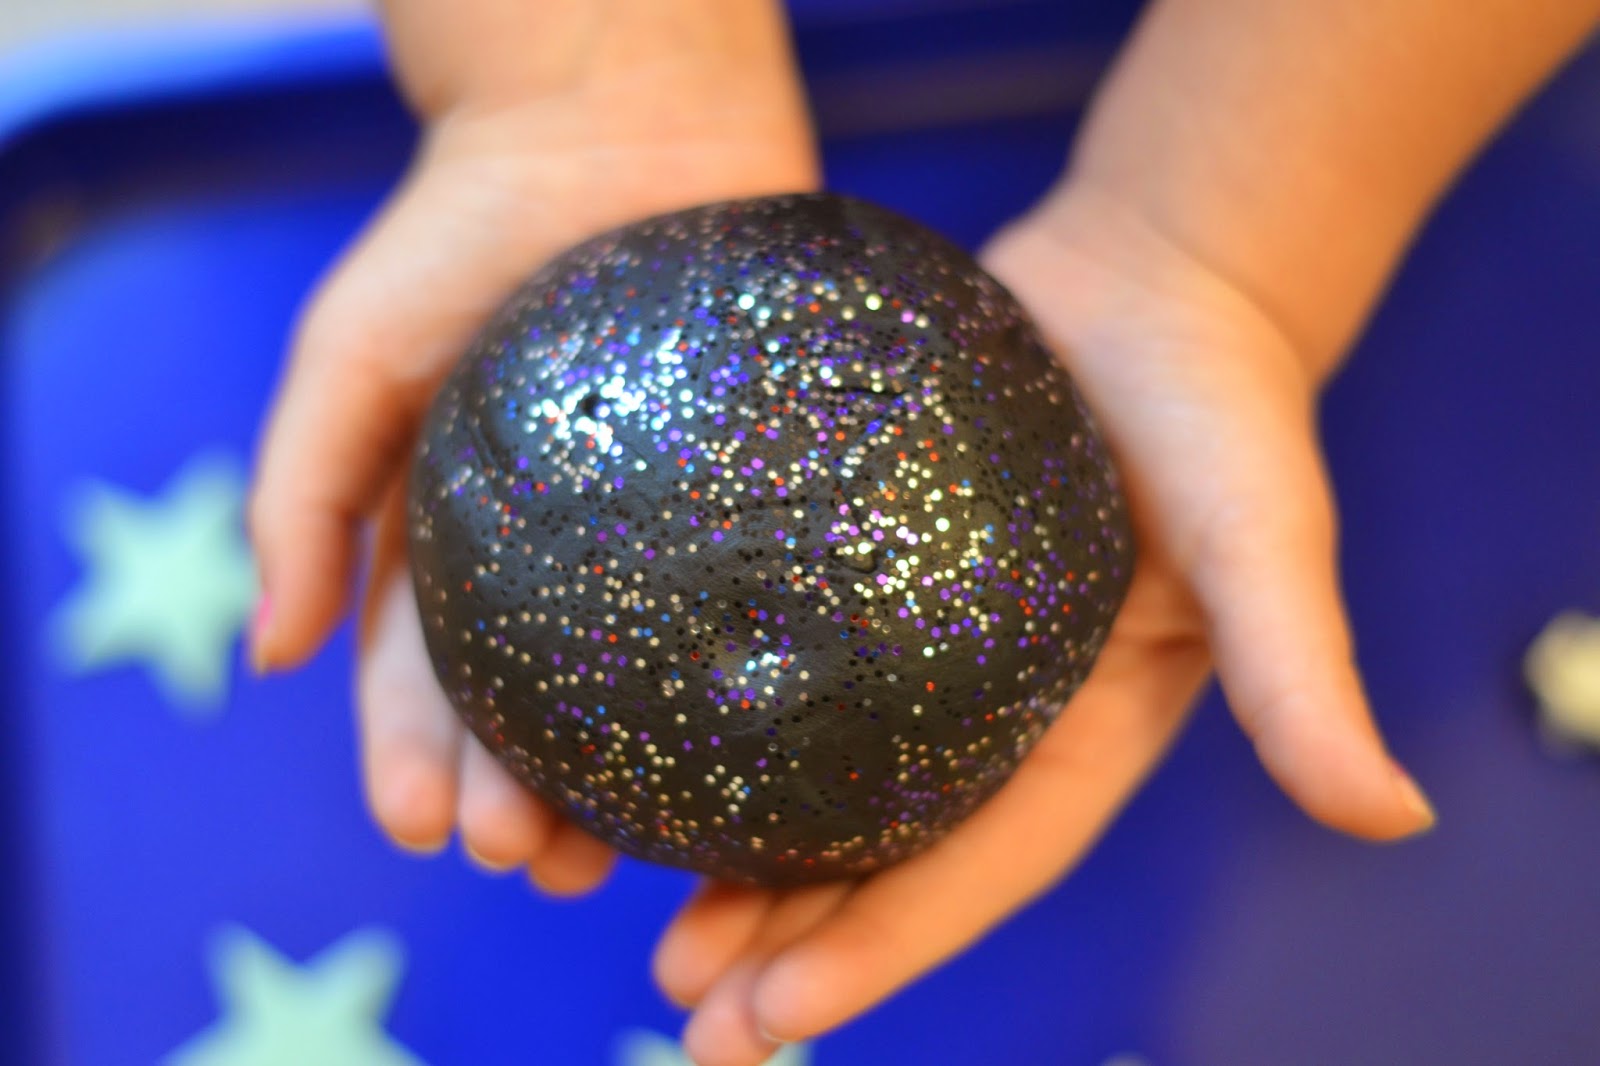 GALAXY DOUGH: a super smooth, ultra sparkly, & really stretchy play material for kids. This no cook recipe takes seconds to make & is so FUN! My kids played four hours!